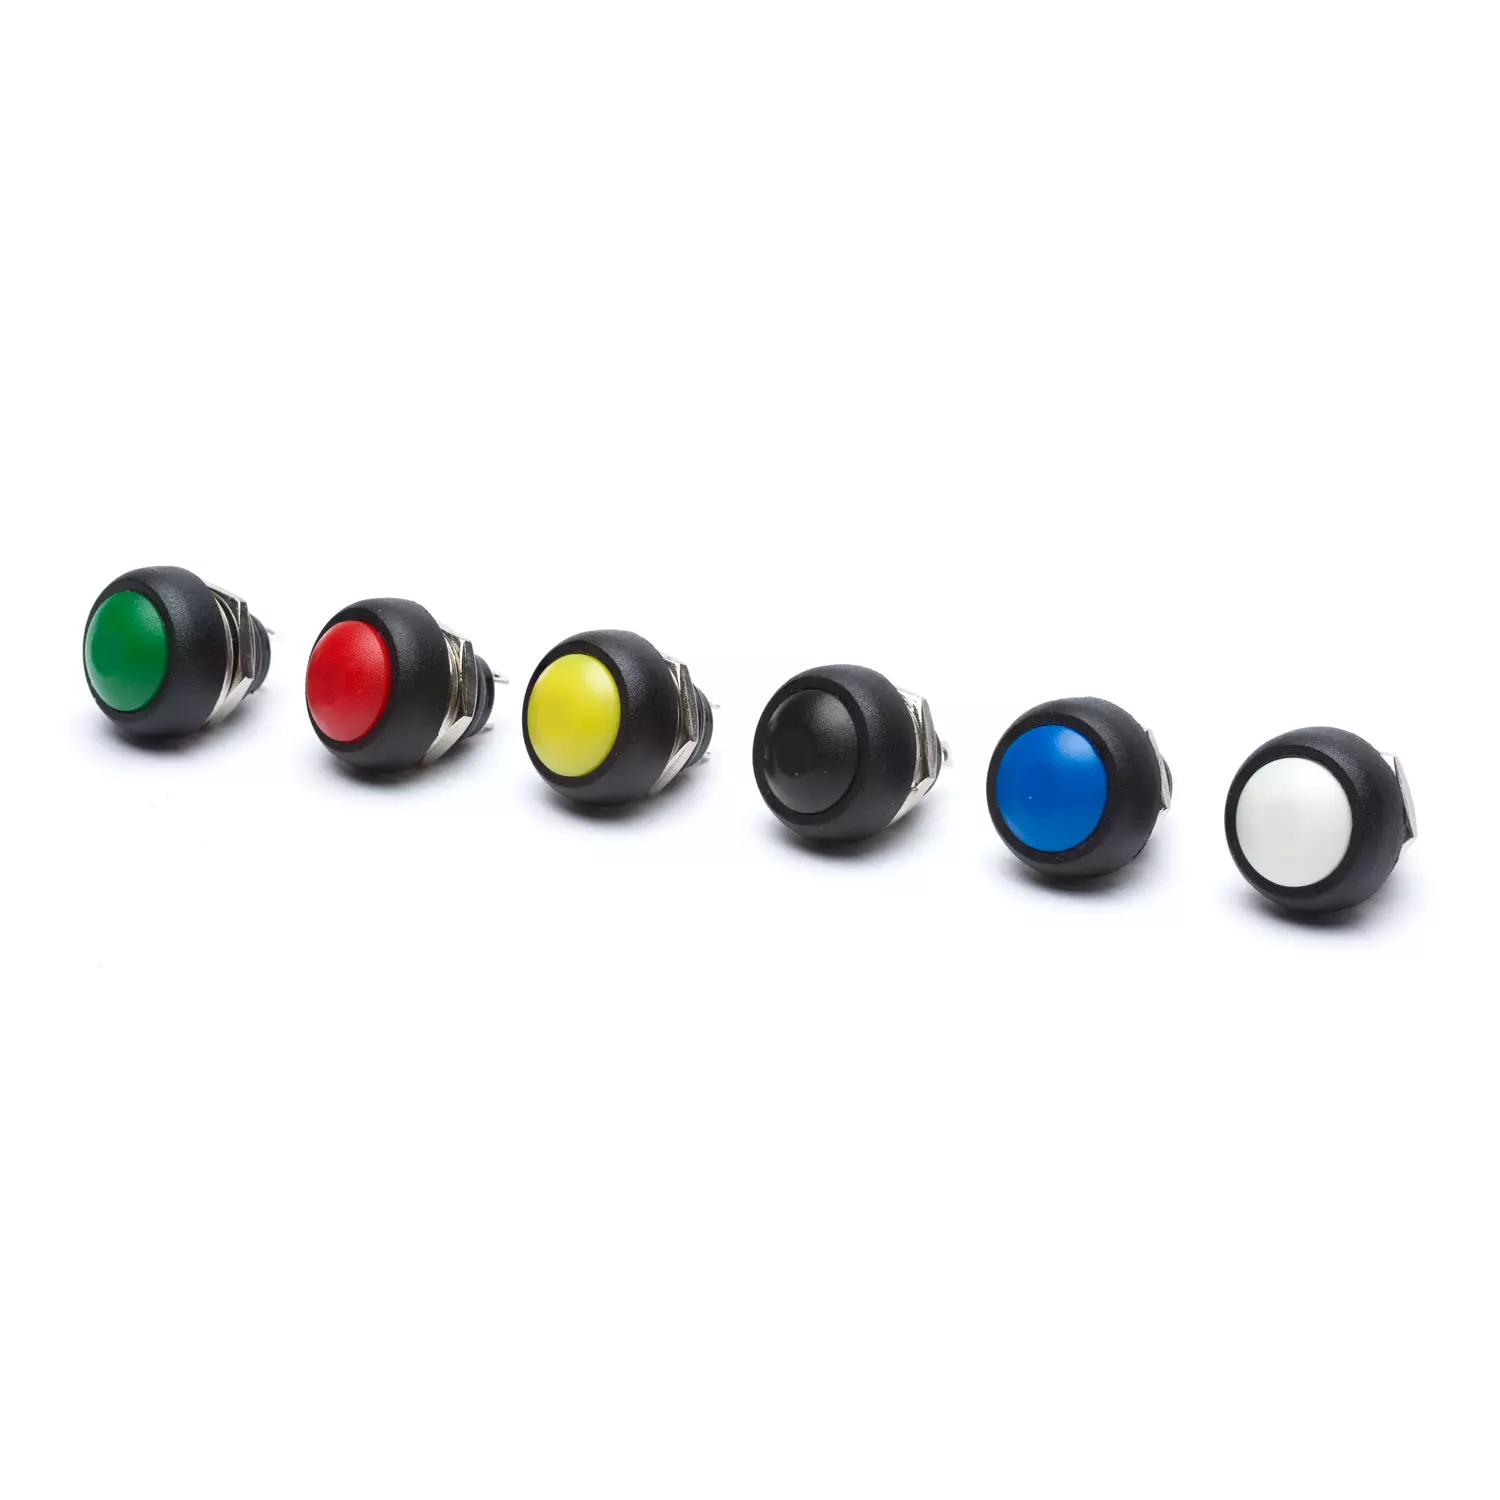 Photo of 12mm Momentary Push Button Dome - Red